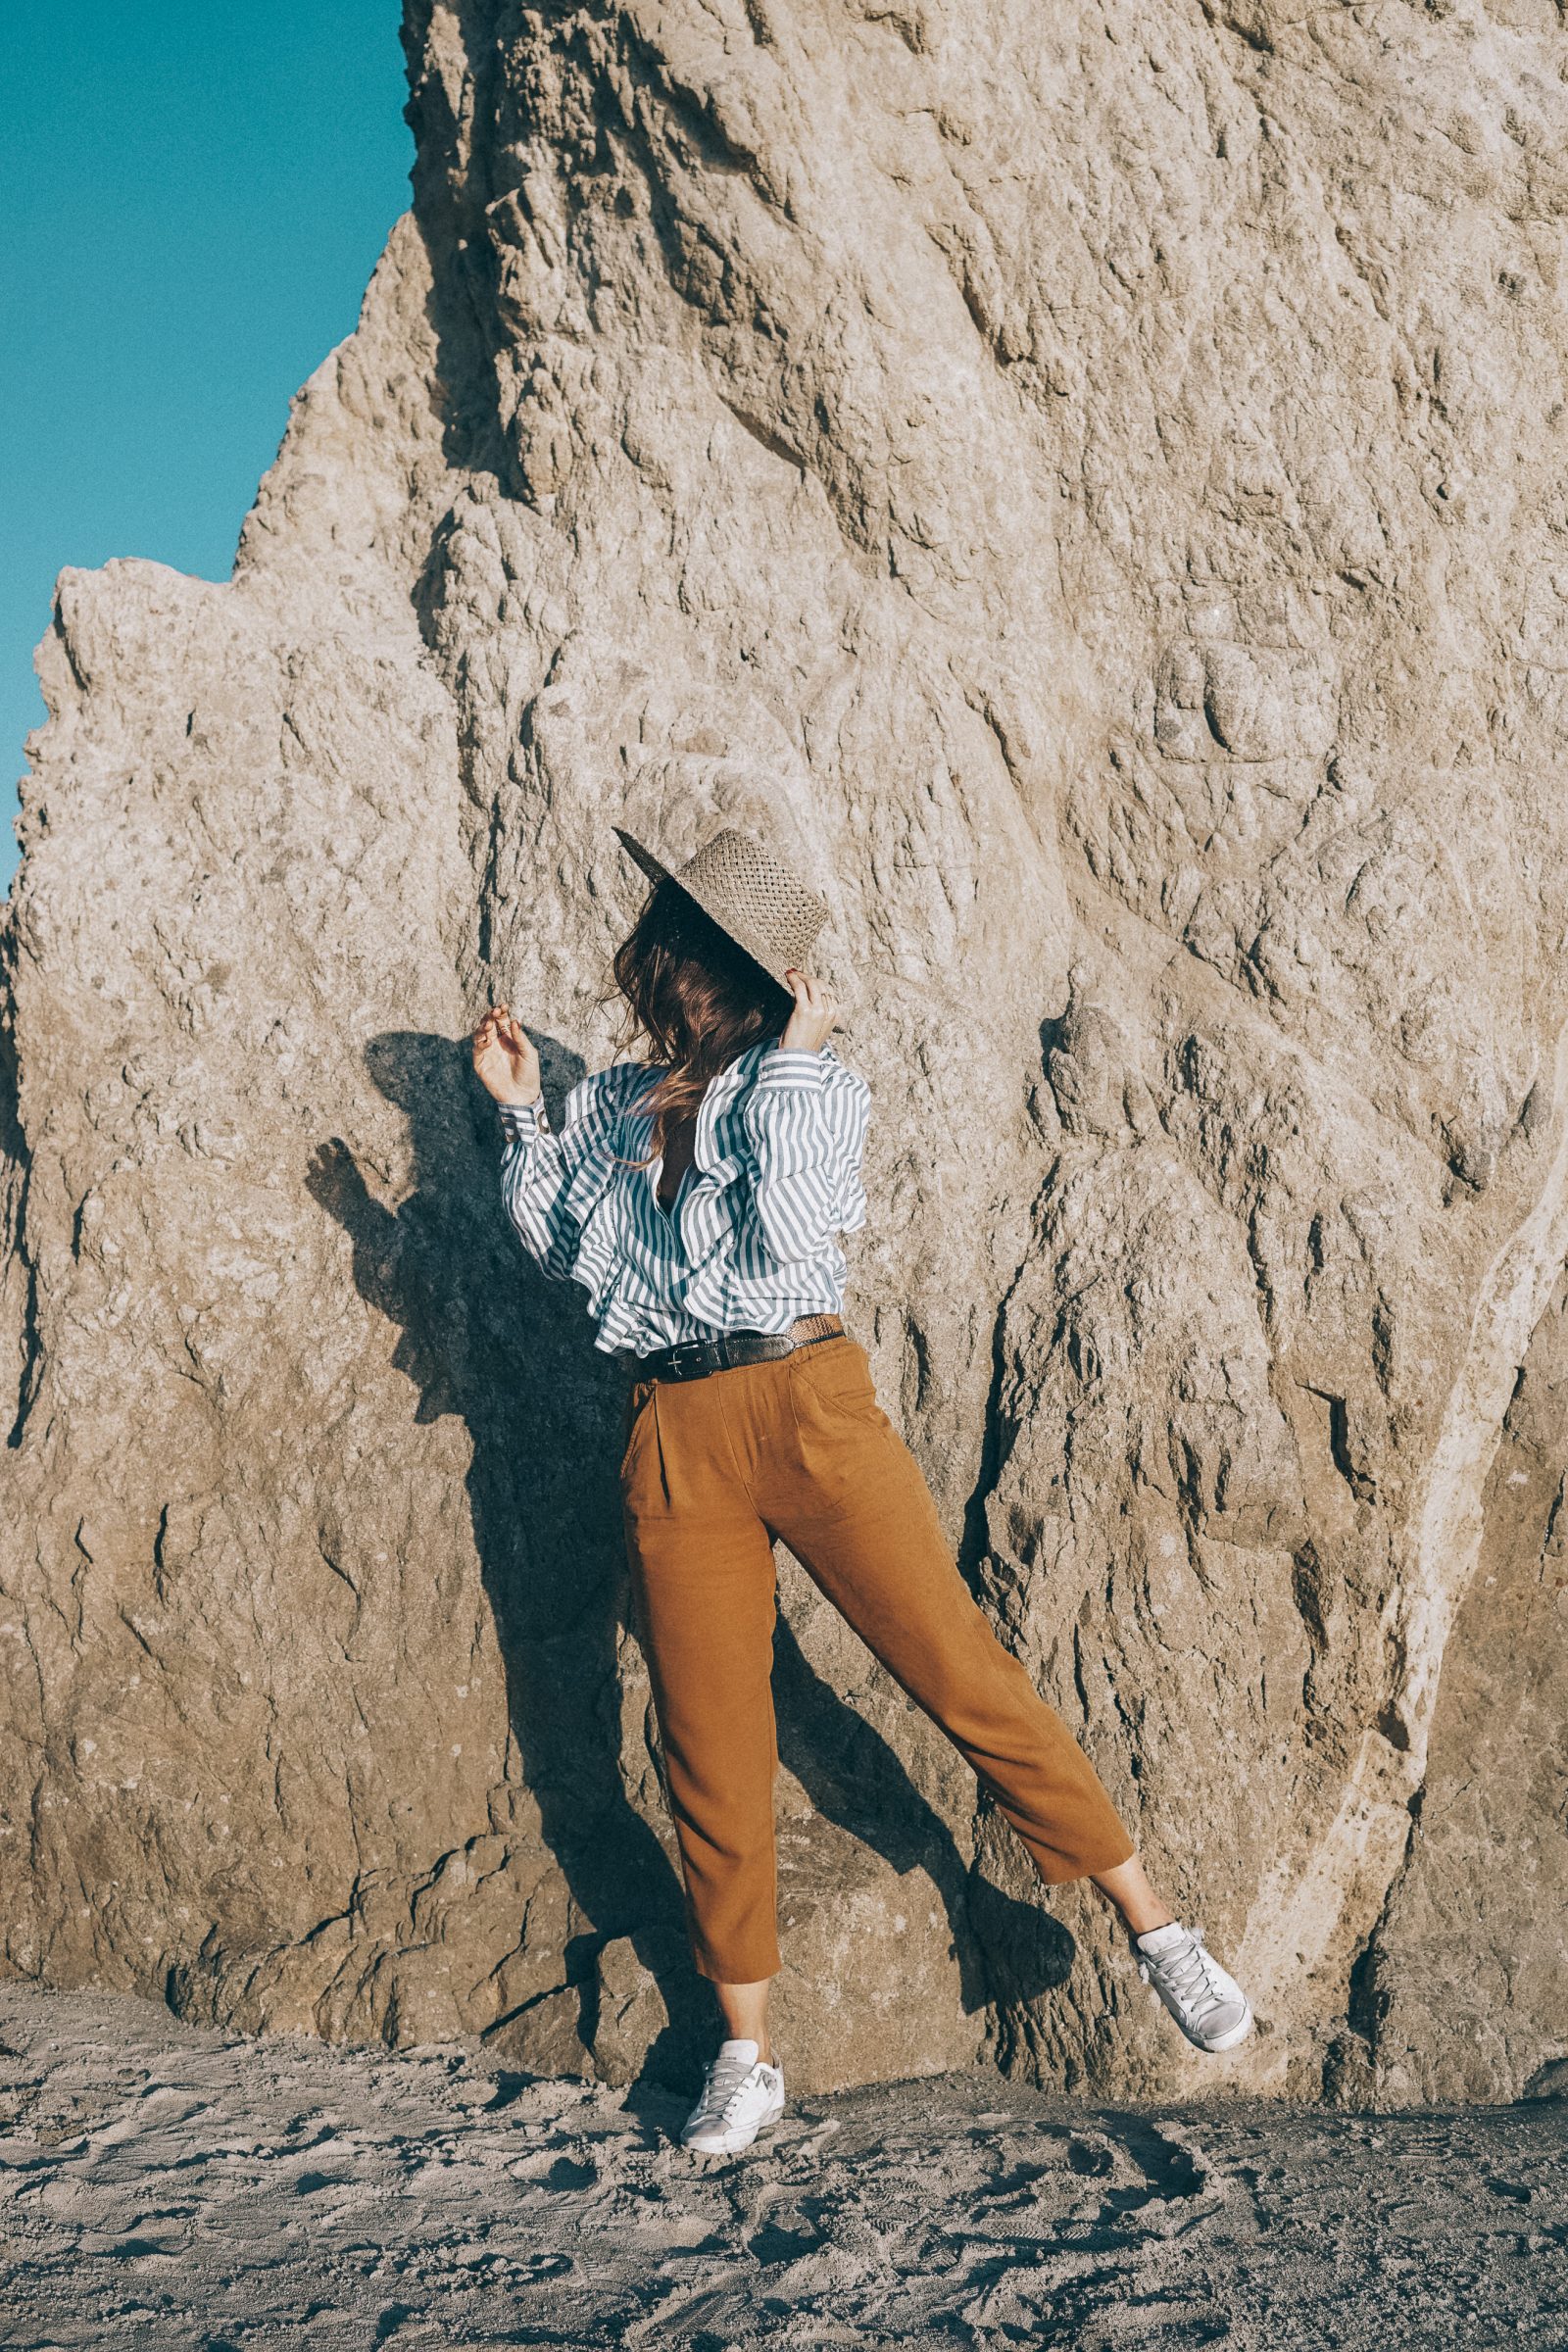 stripped_blouse-camel_trousers-lack_of_color_hat-wanderlust_jewels-matador_beach-malibu-golden_goose_sneakers-street_style-collage_vintage-111